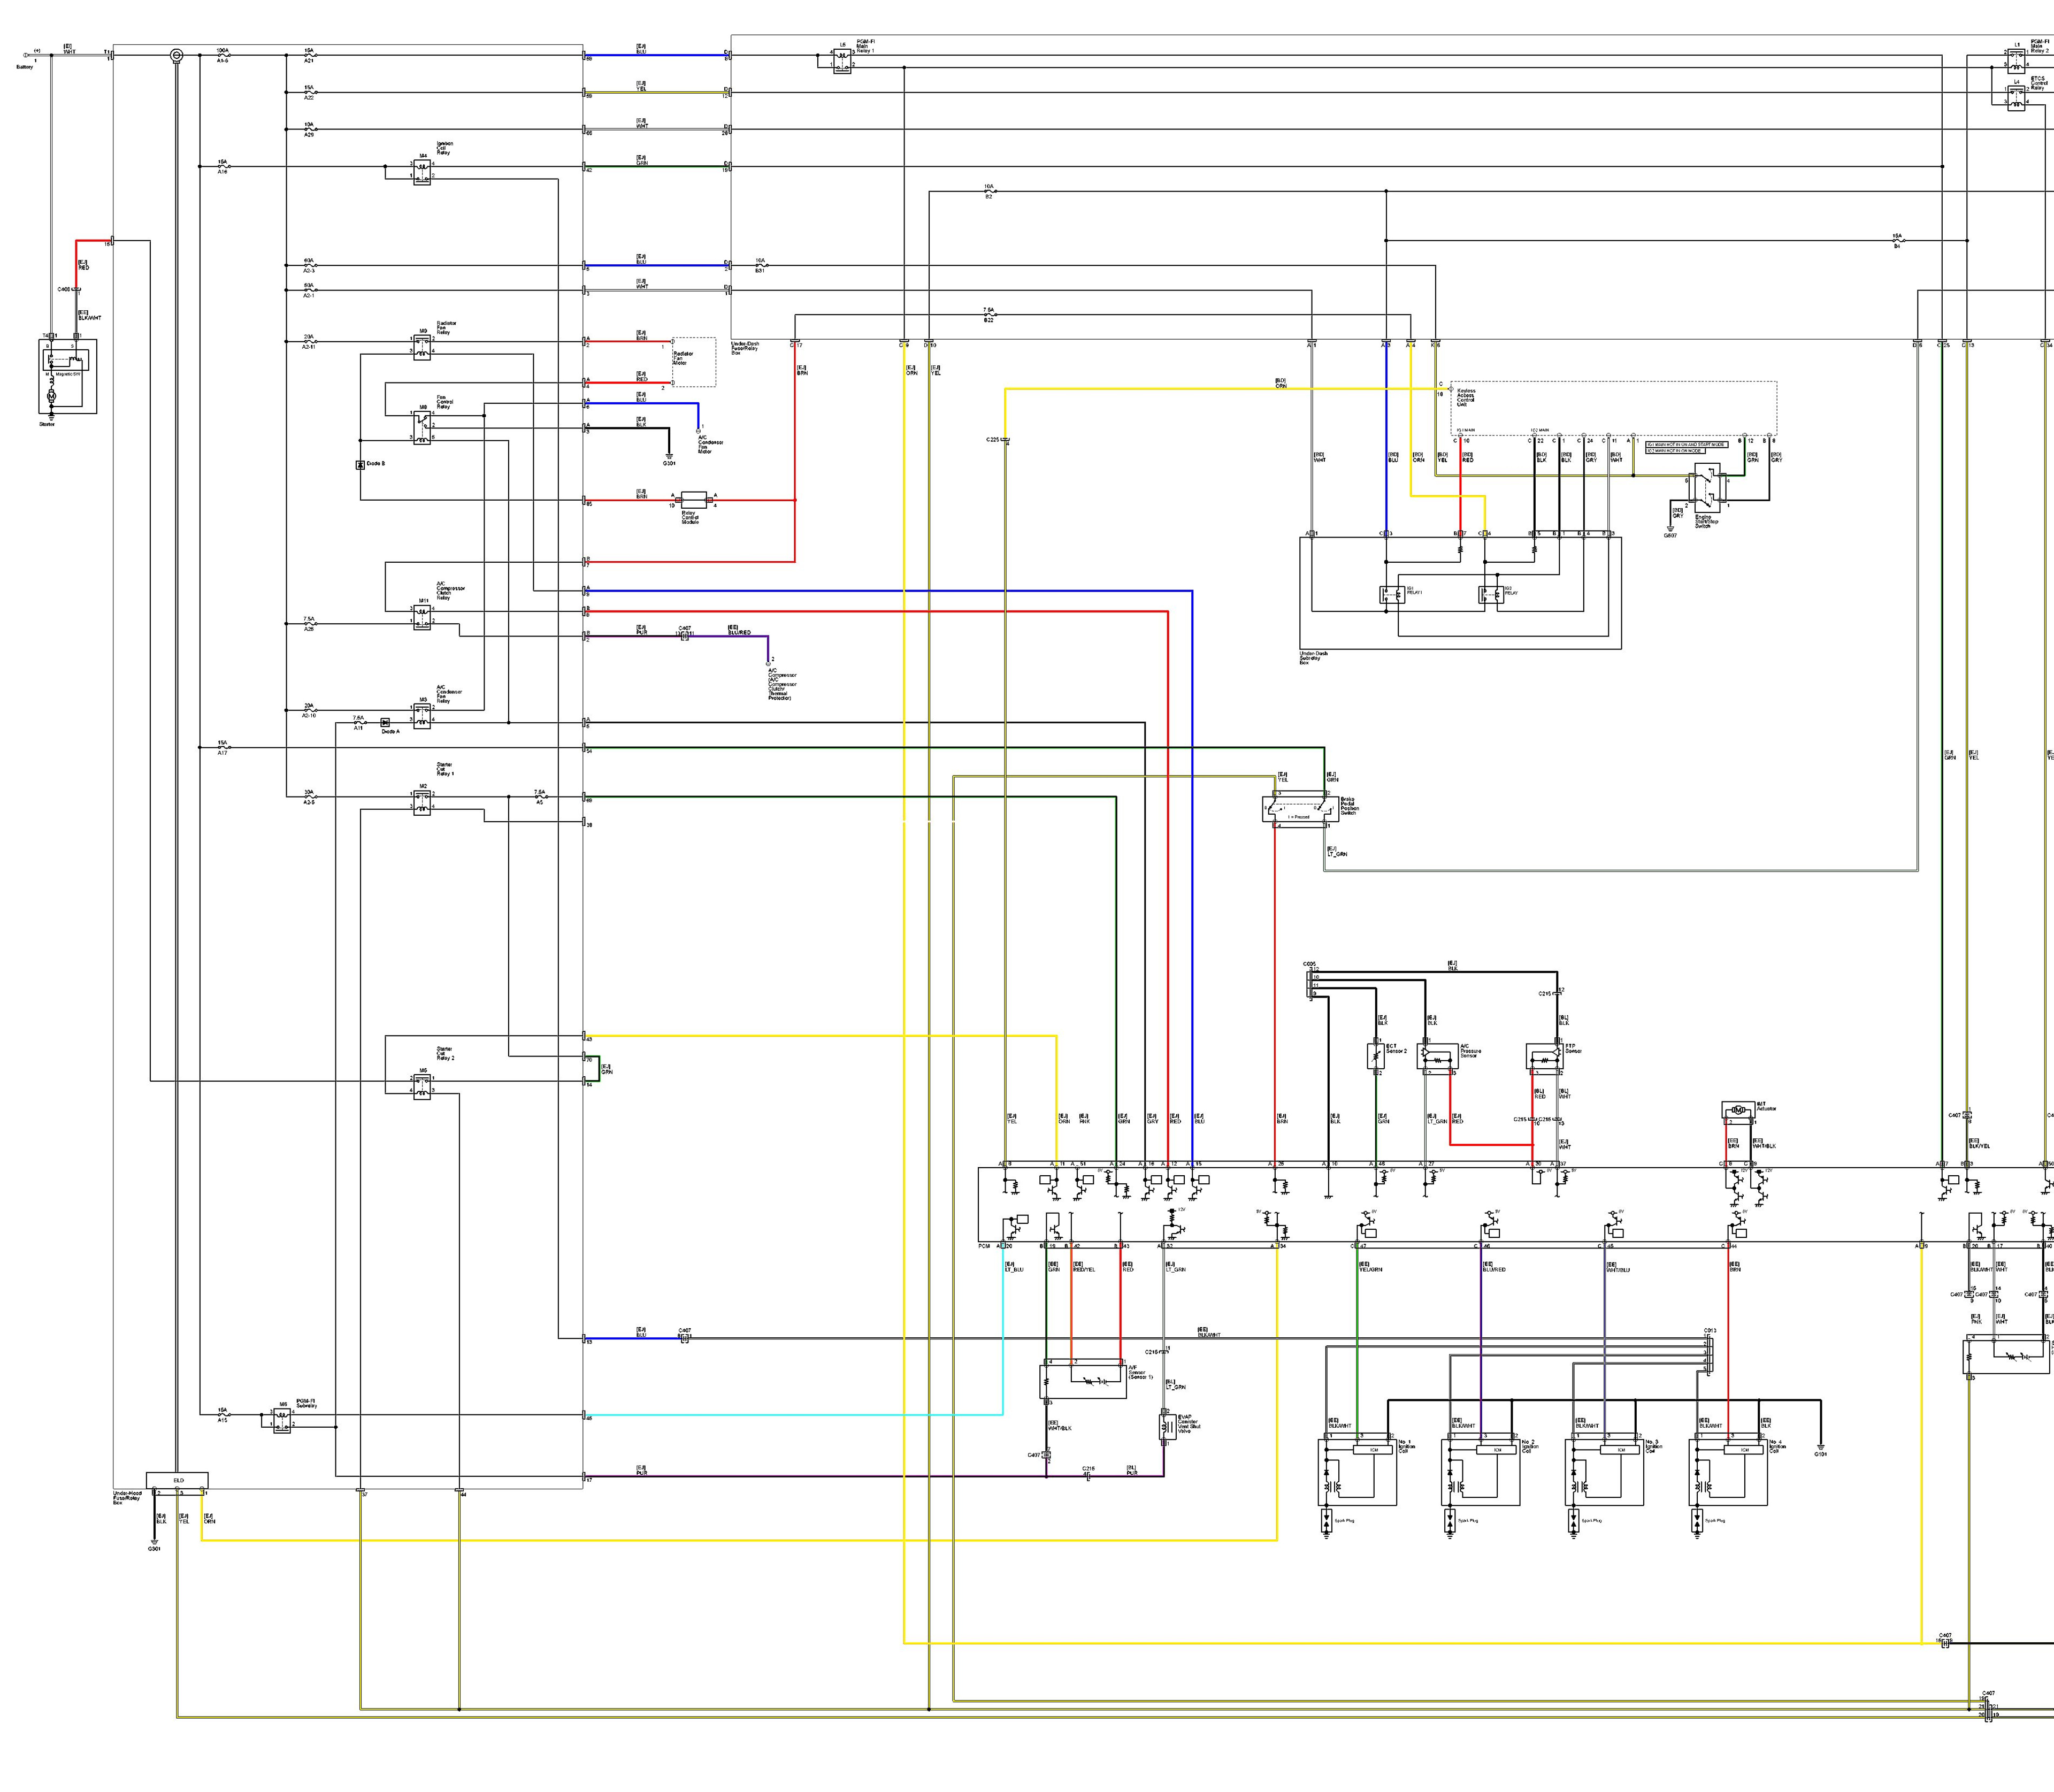 2000 Plymouth Breeze wiring diagrams sample